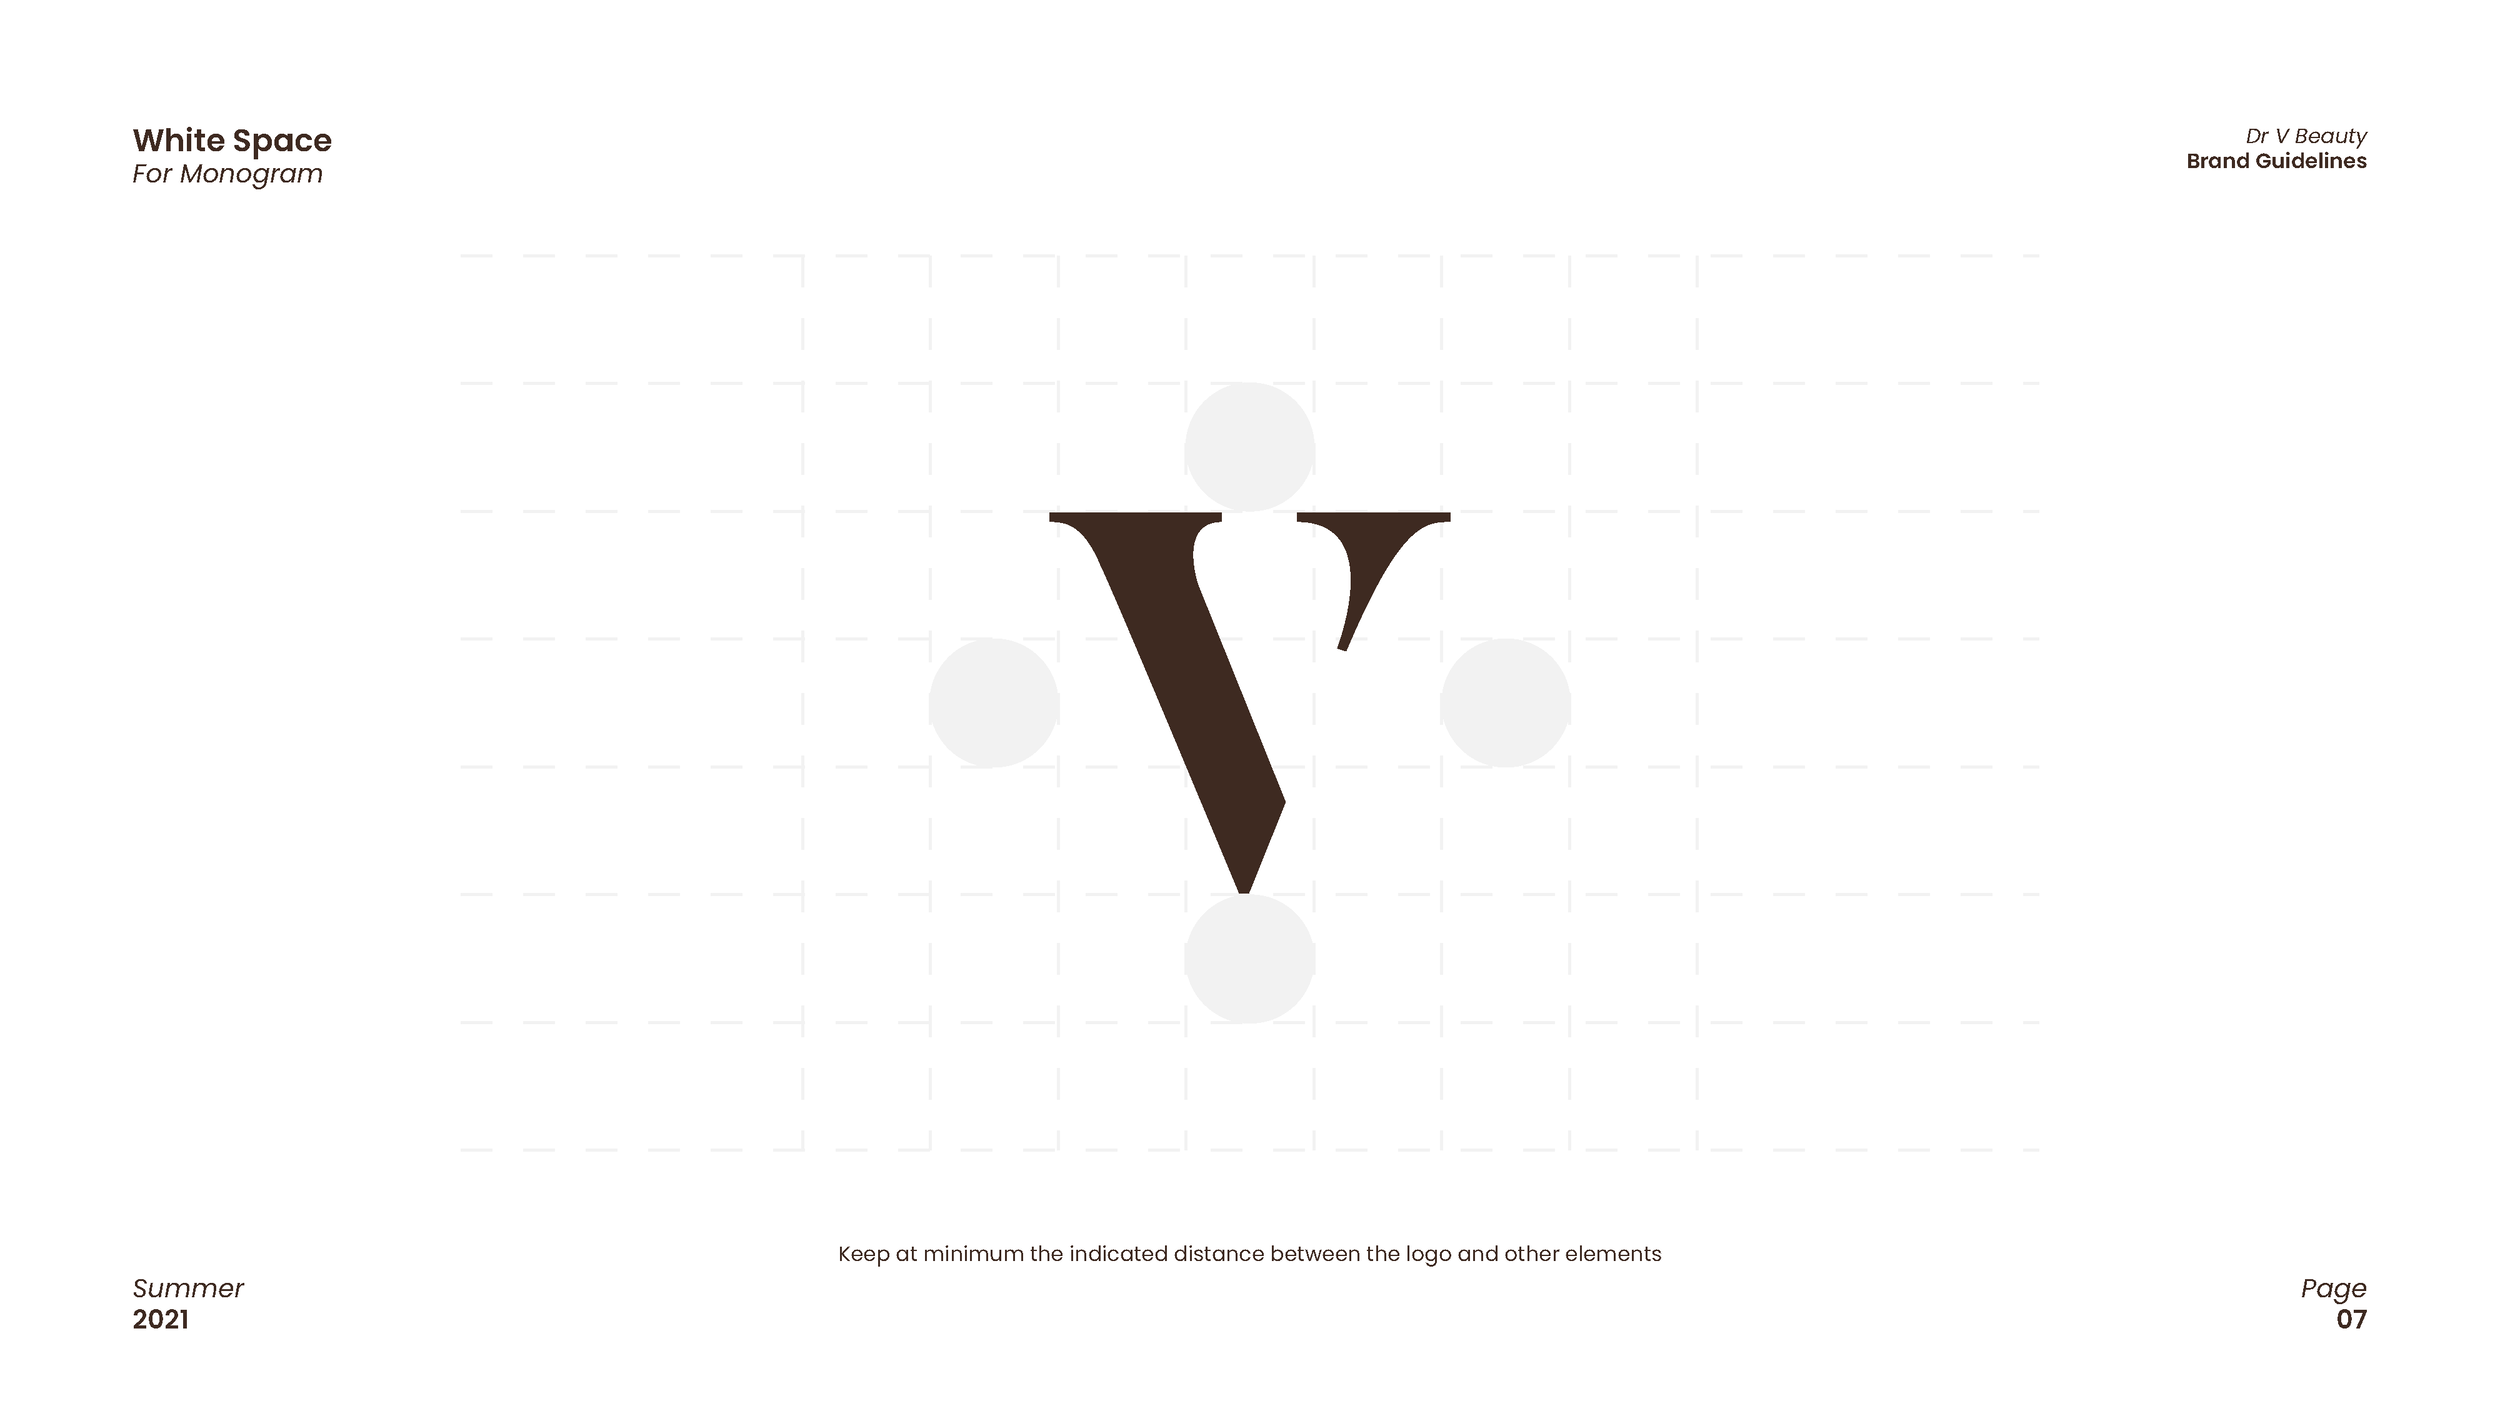 Dr V Beauty - Brand Guidelines_Page_07.png